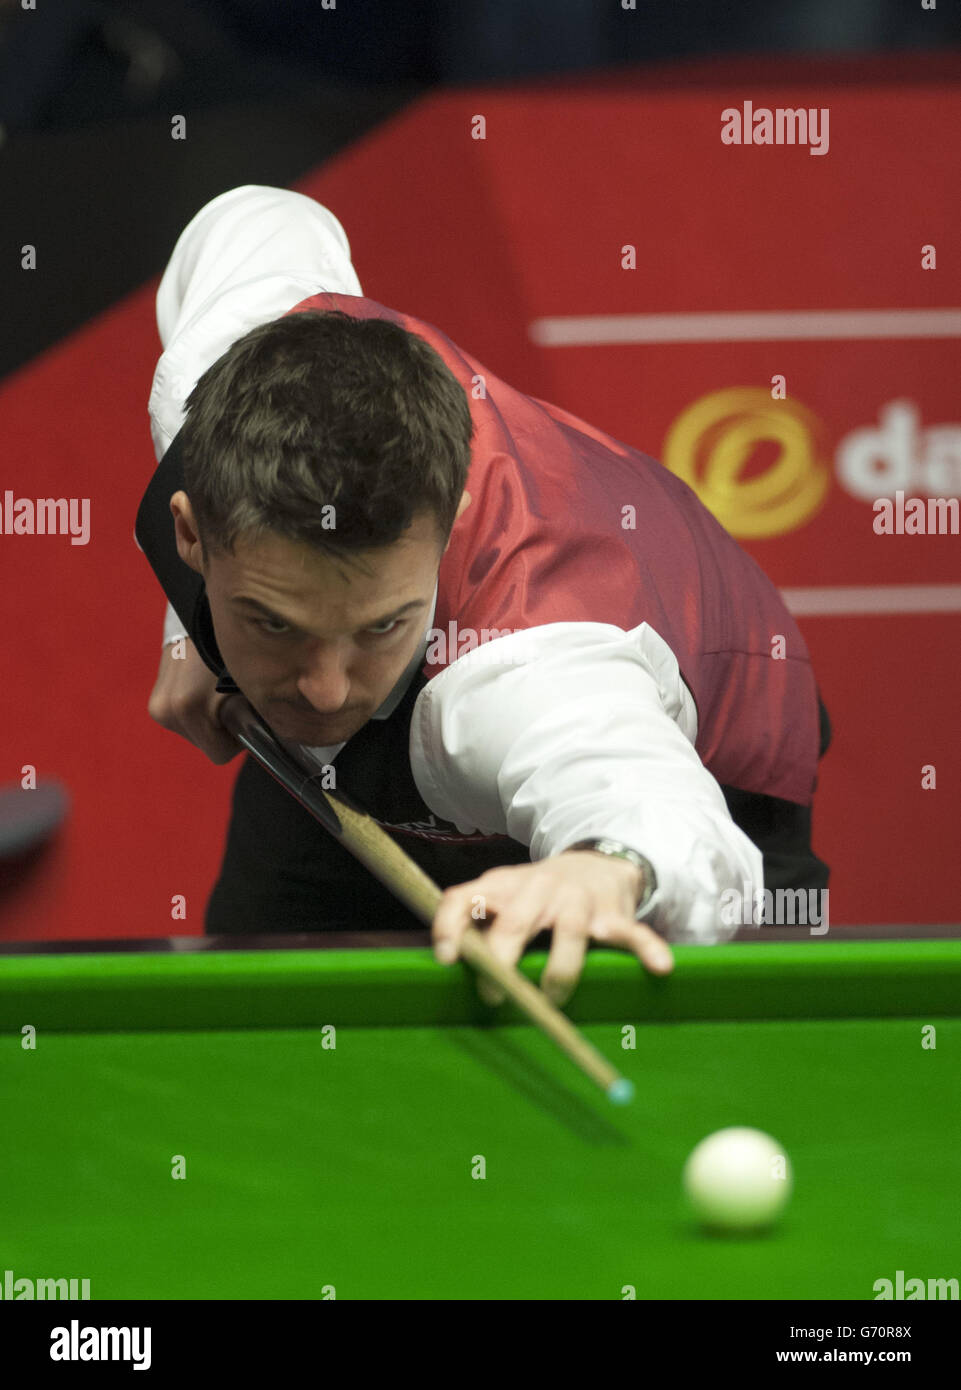 Michael Holt in action against Mark Allen during the Dafabet World Snooker Championships at The Crucible, Sheffield. PRESS ASSOCIATION Photo. Picture date: Wednesday April 23, 2014. See PA story SNOOKER World. Photo credit should read: Tim Goode/PA Wire Stock Photo